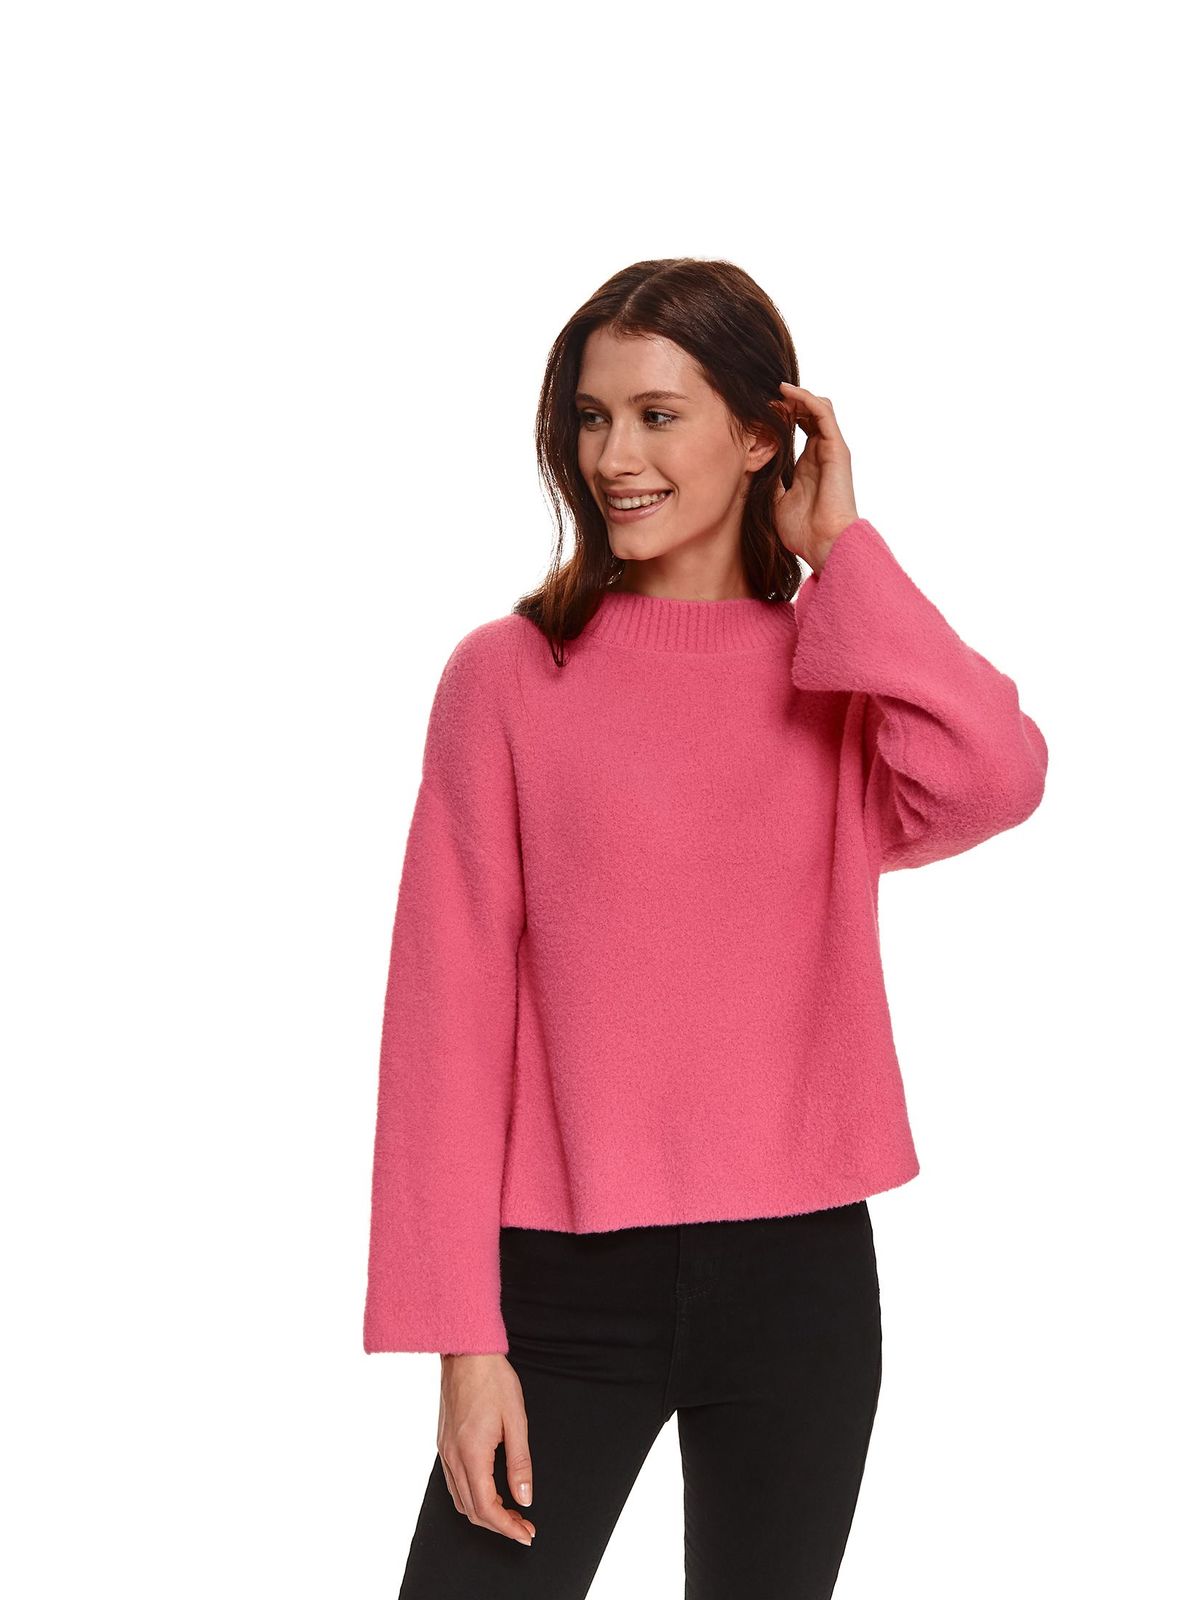 Pink sweater knitted loose fit